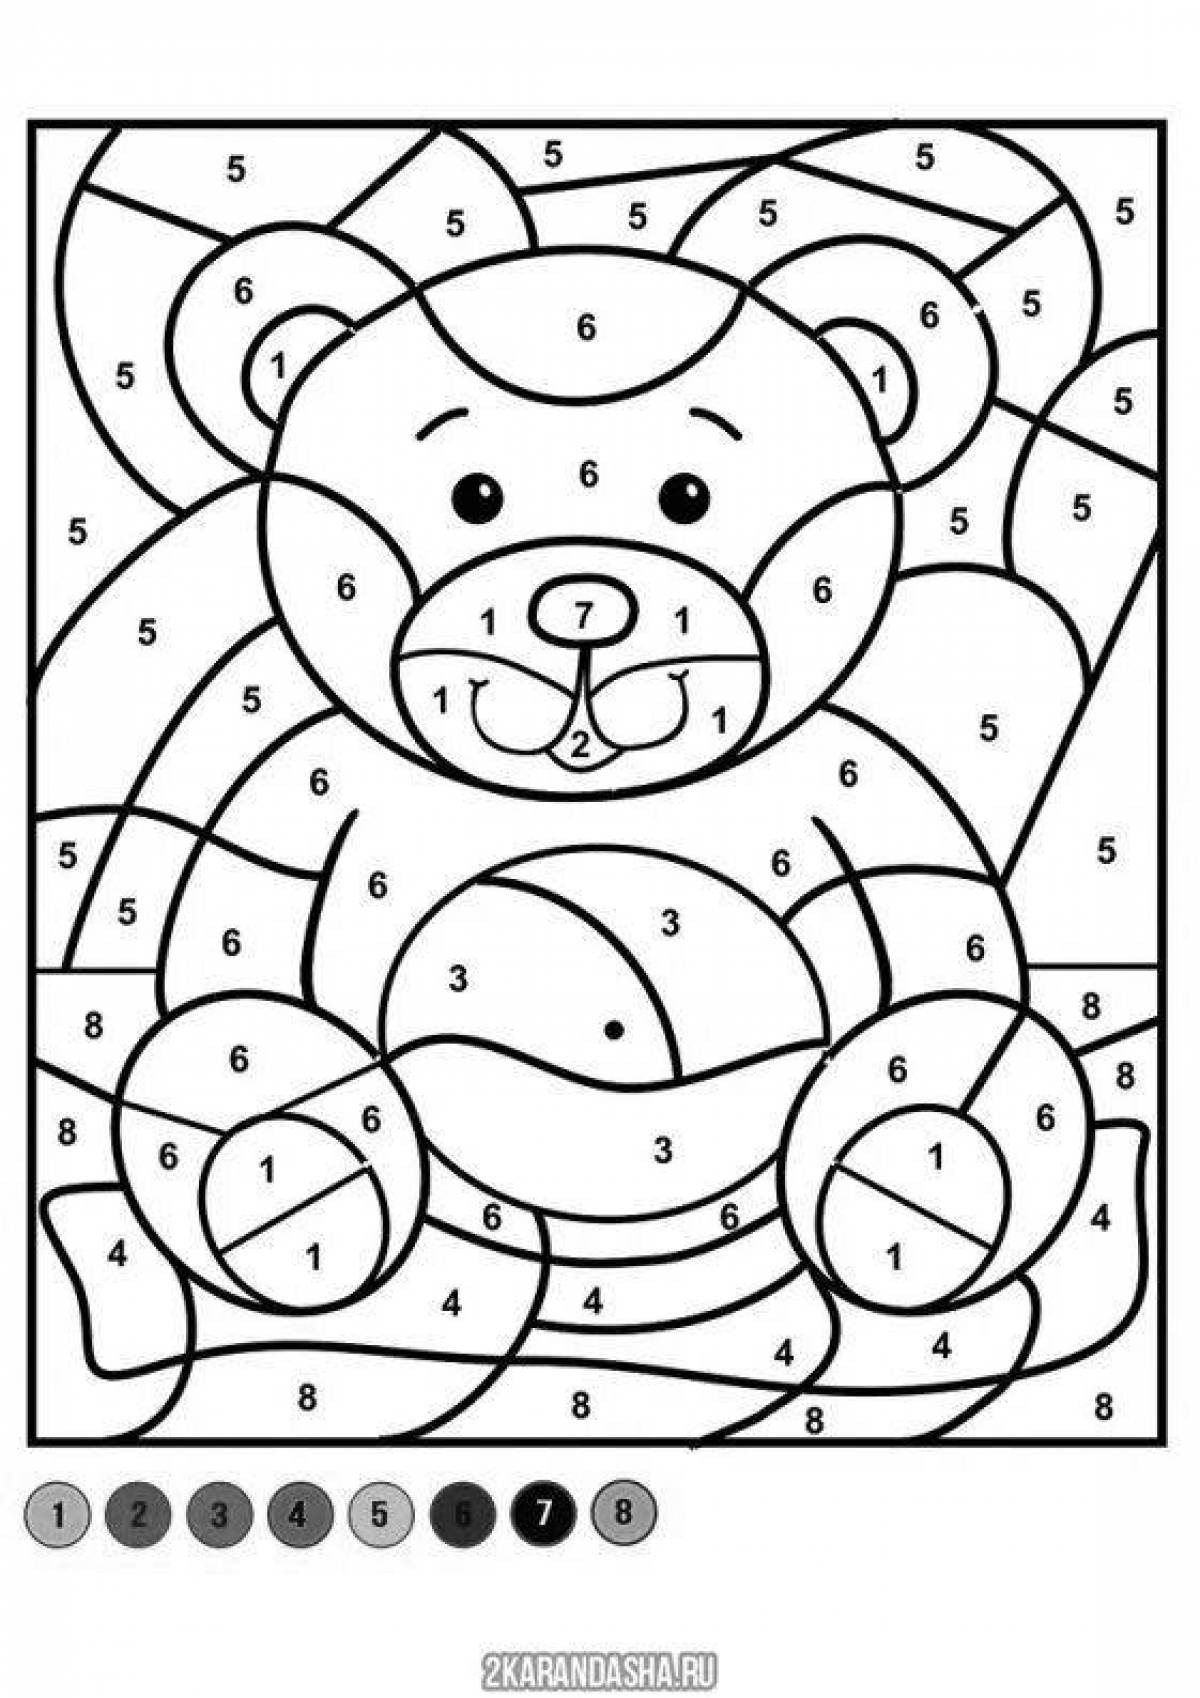 Colored children's coloring by numbers